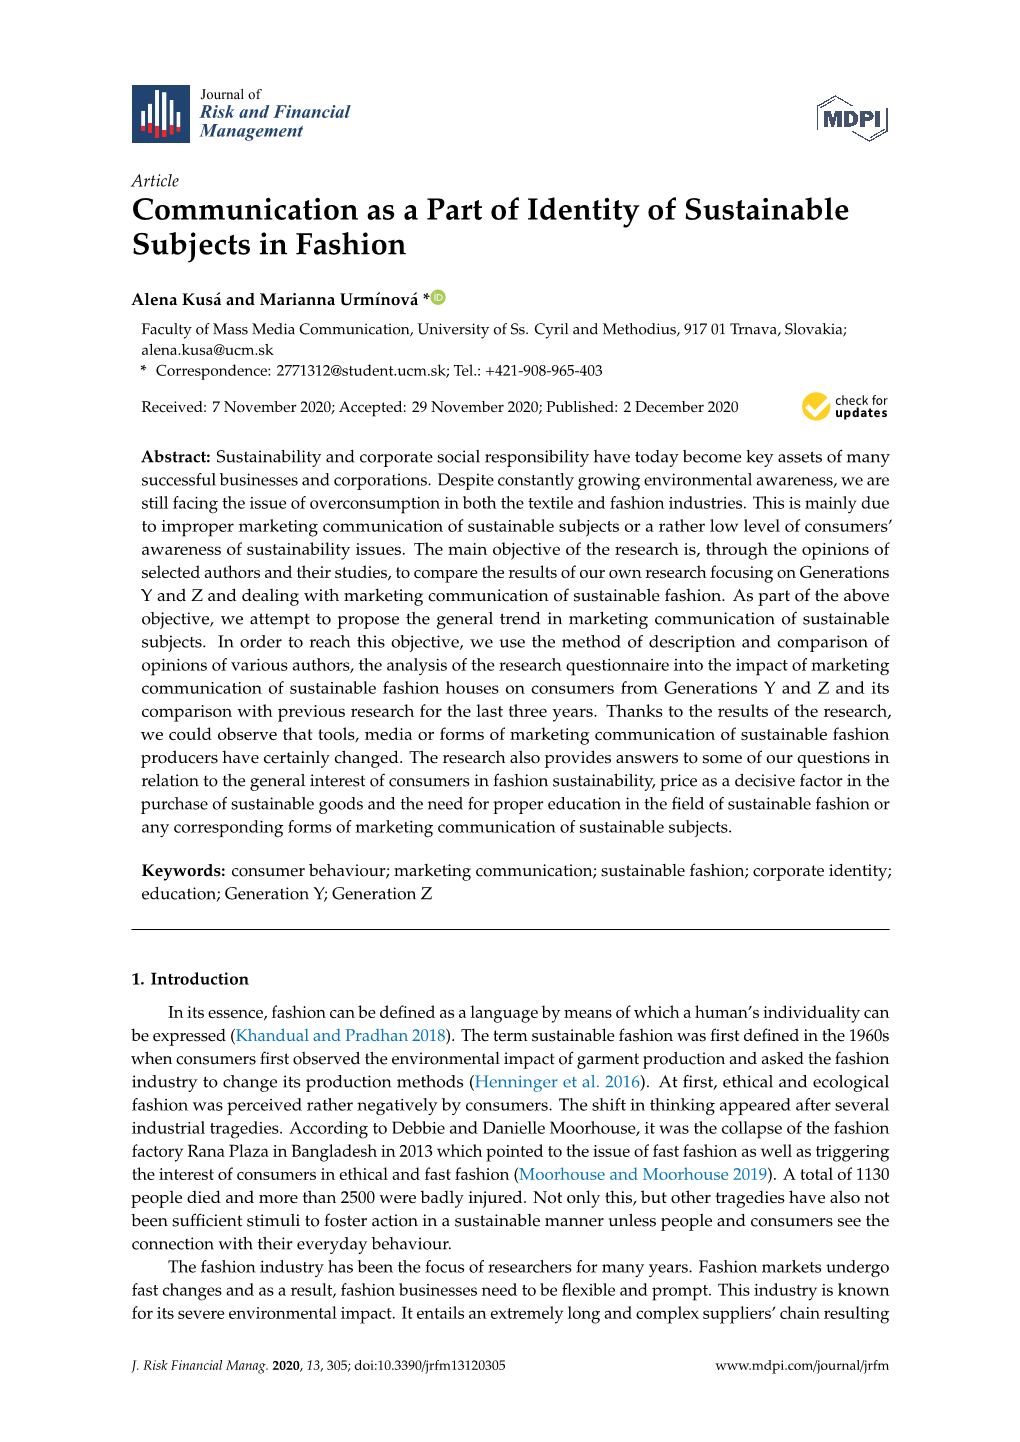 Communication As a Part of Identity of Sustainable Subjects in Fashion